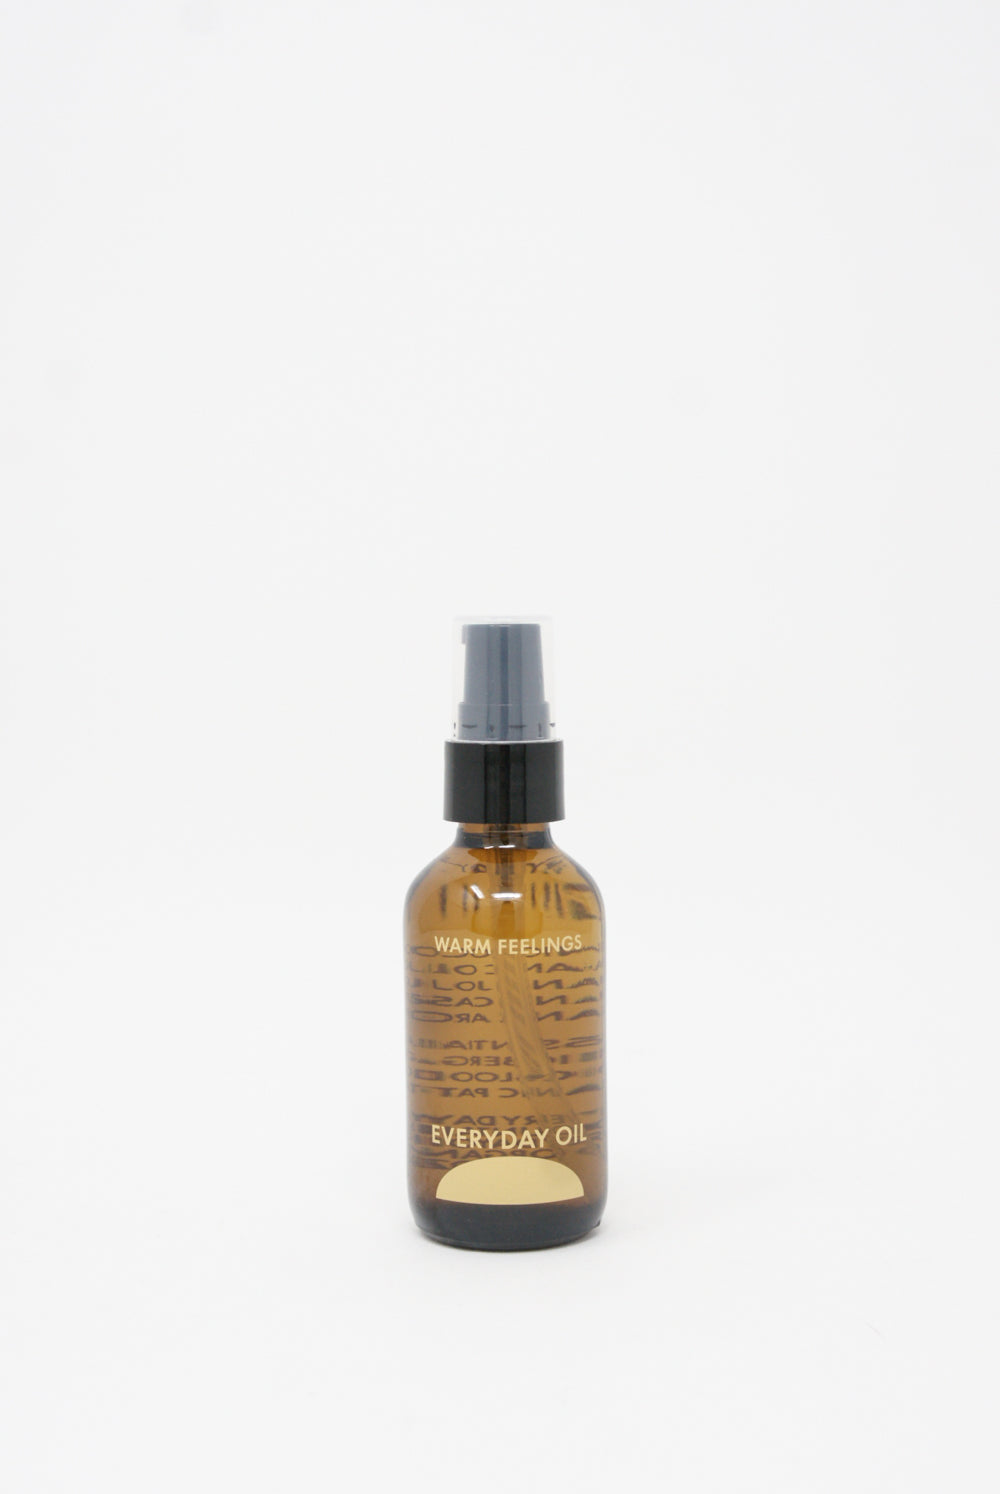 A small bottle of Everyday Oil Warm Feelings - 2 oz by Everyday Oil on a white background.